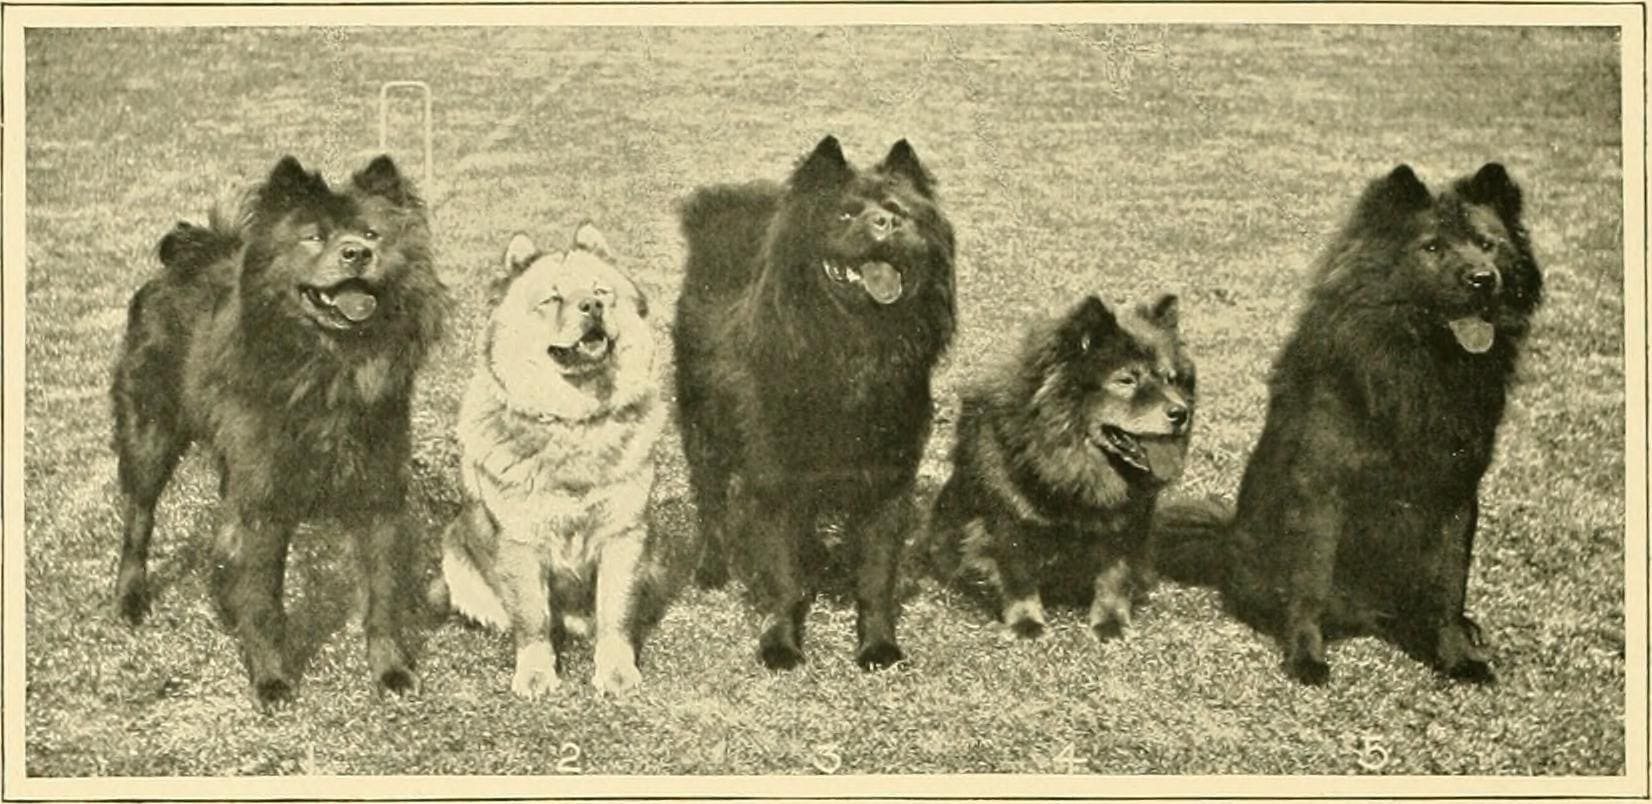 1865-1930 HISTORY TIMELINE- Earliest Chows and Breeders of England and America - CHOWTALES